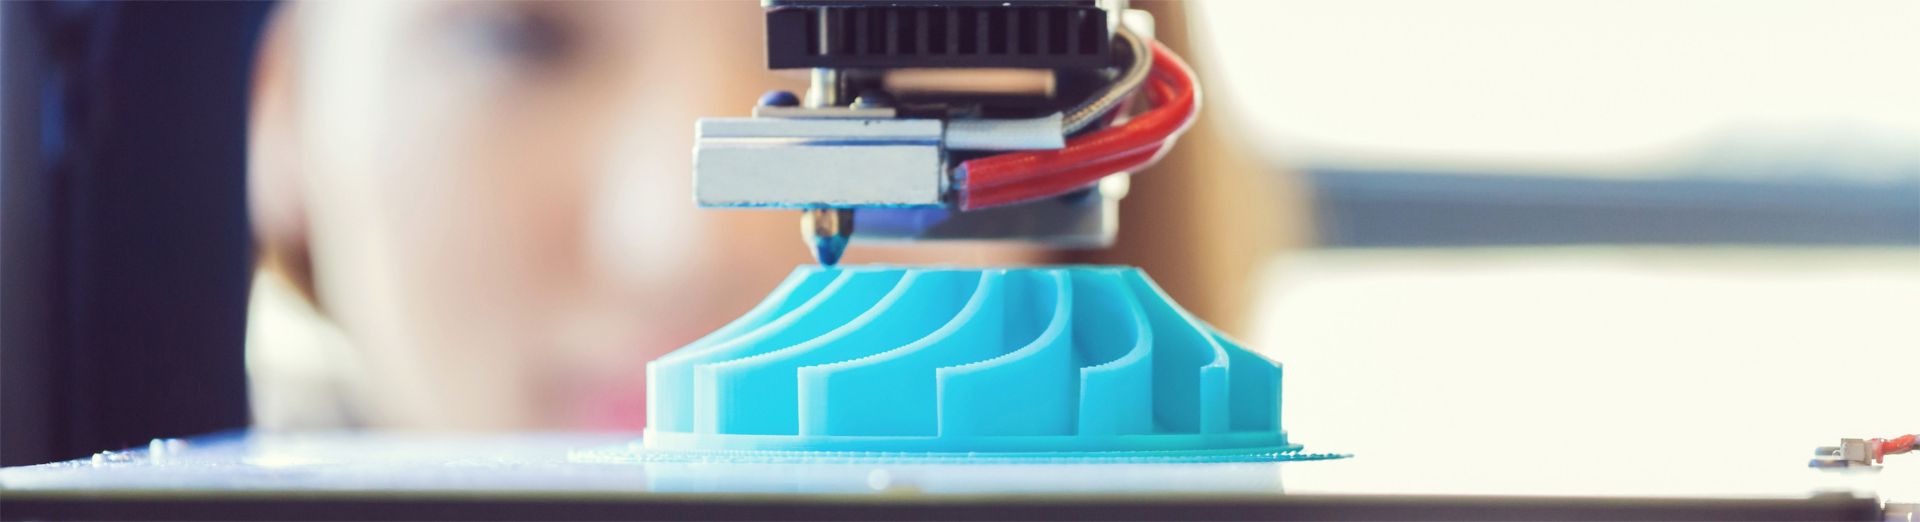 A young woman uses 3D printing technology